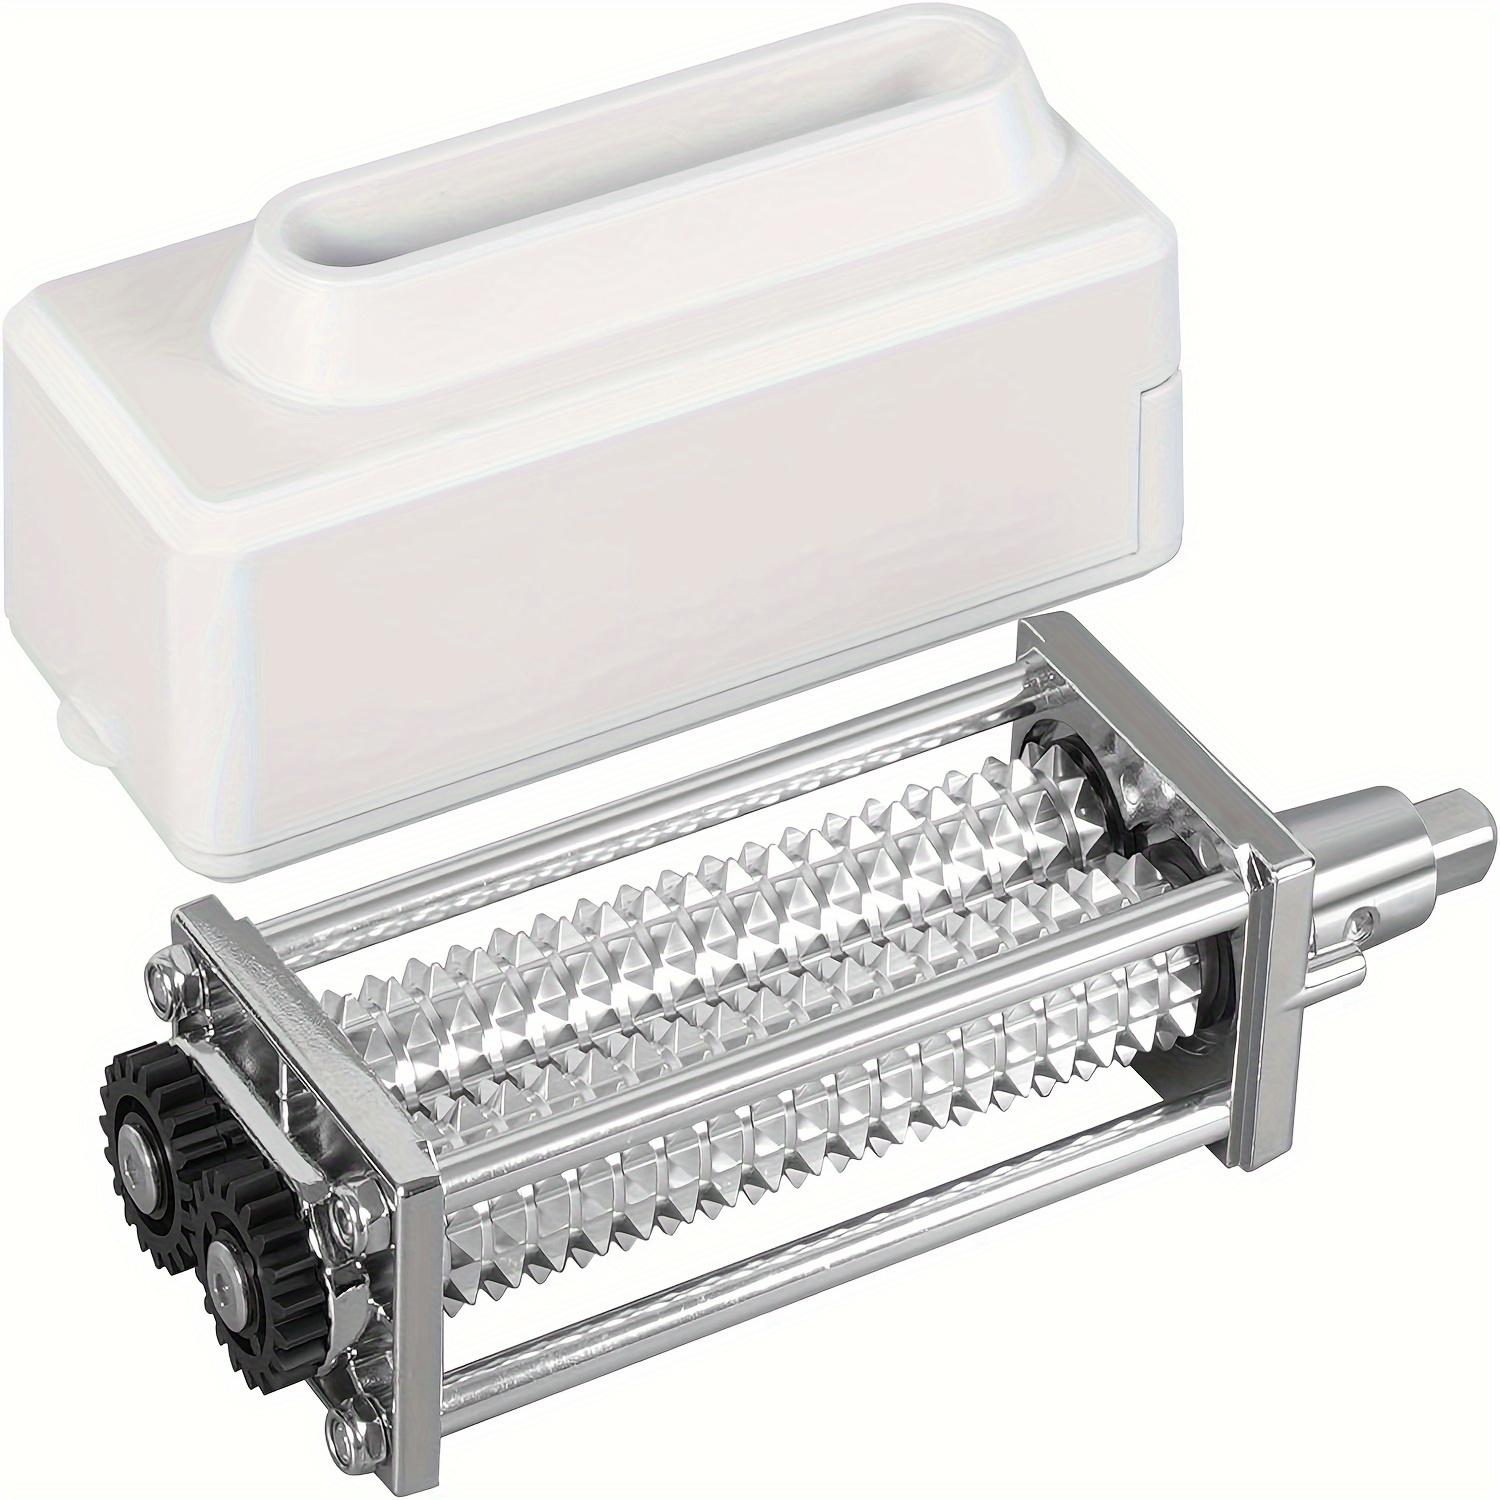 The Meat Tenderizer Accessory Is Compatible With All Kitchenaid Vertical  Mixers, And The Pom Gears Meat Tenderizer No Longer Blocks Or Breaks Tender  Meat, Making Cooking Smoother And Easier. It Can Be